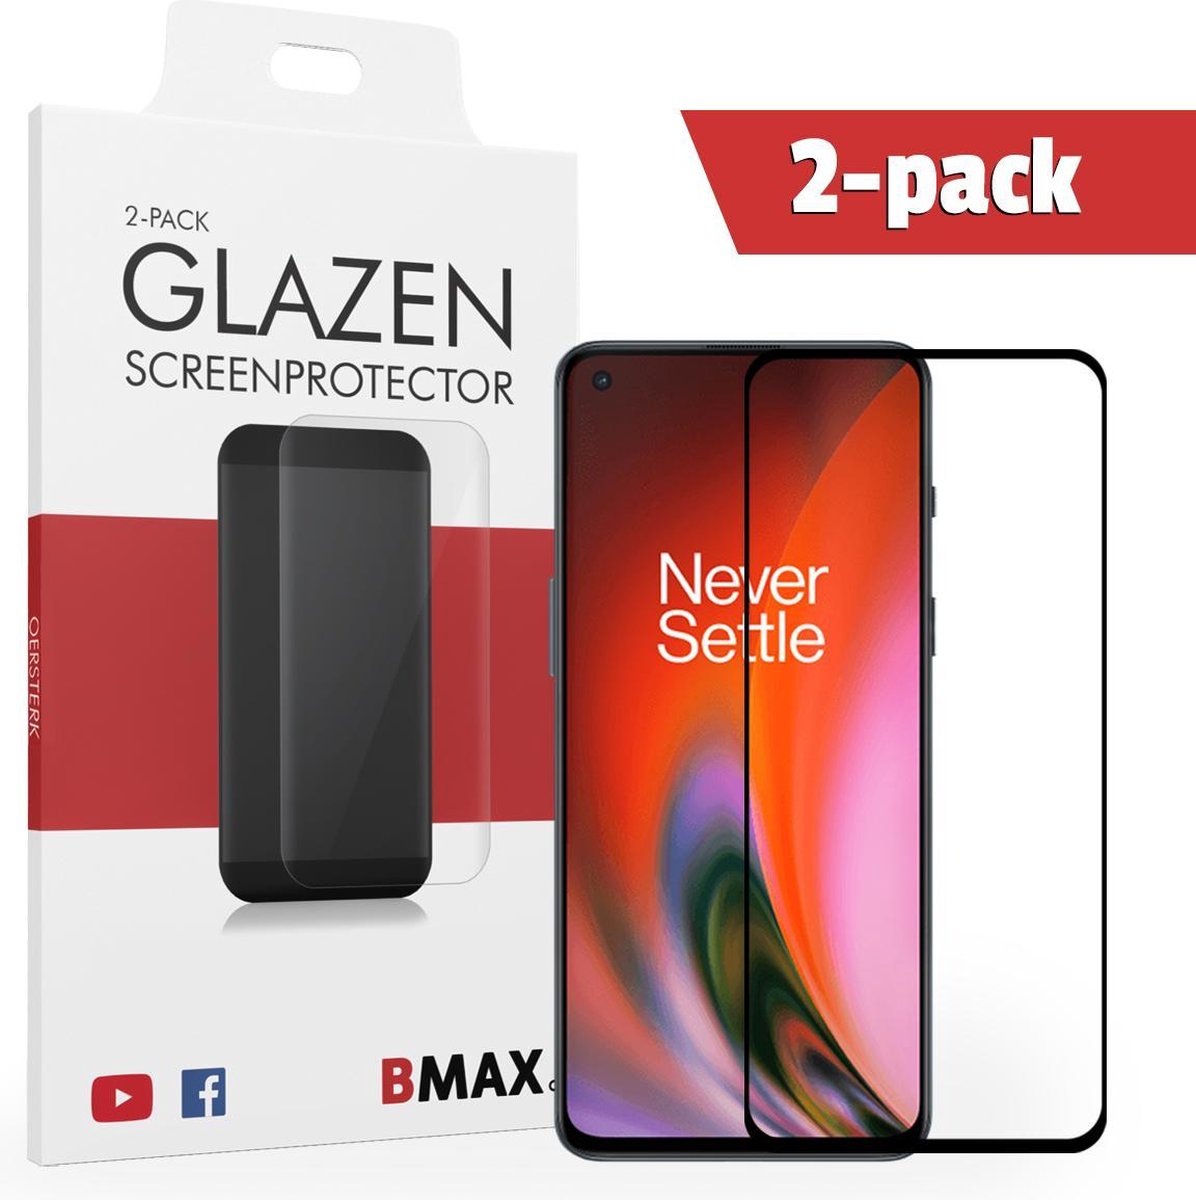 2-pack Bmax Oneplus Nord 2 Screenprotector - Glass - Full Cover 2.5d - Black